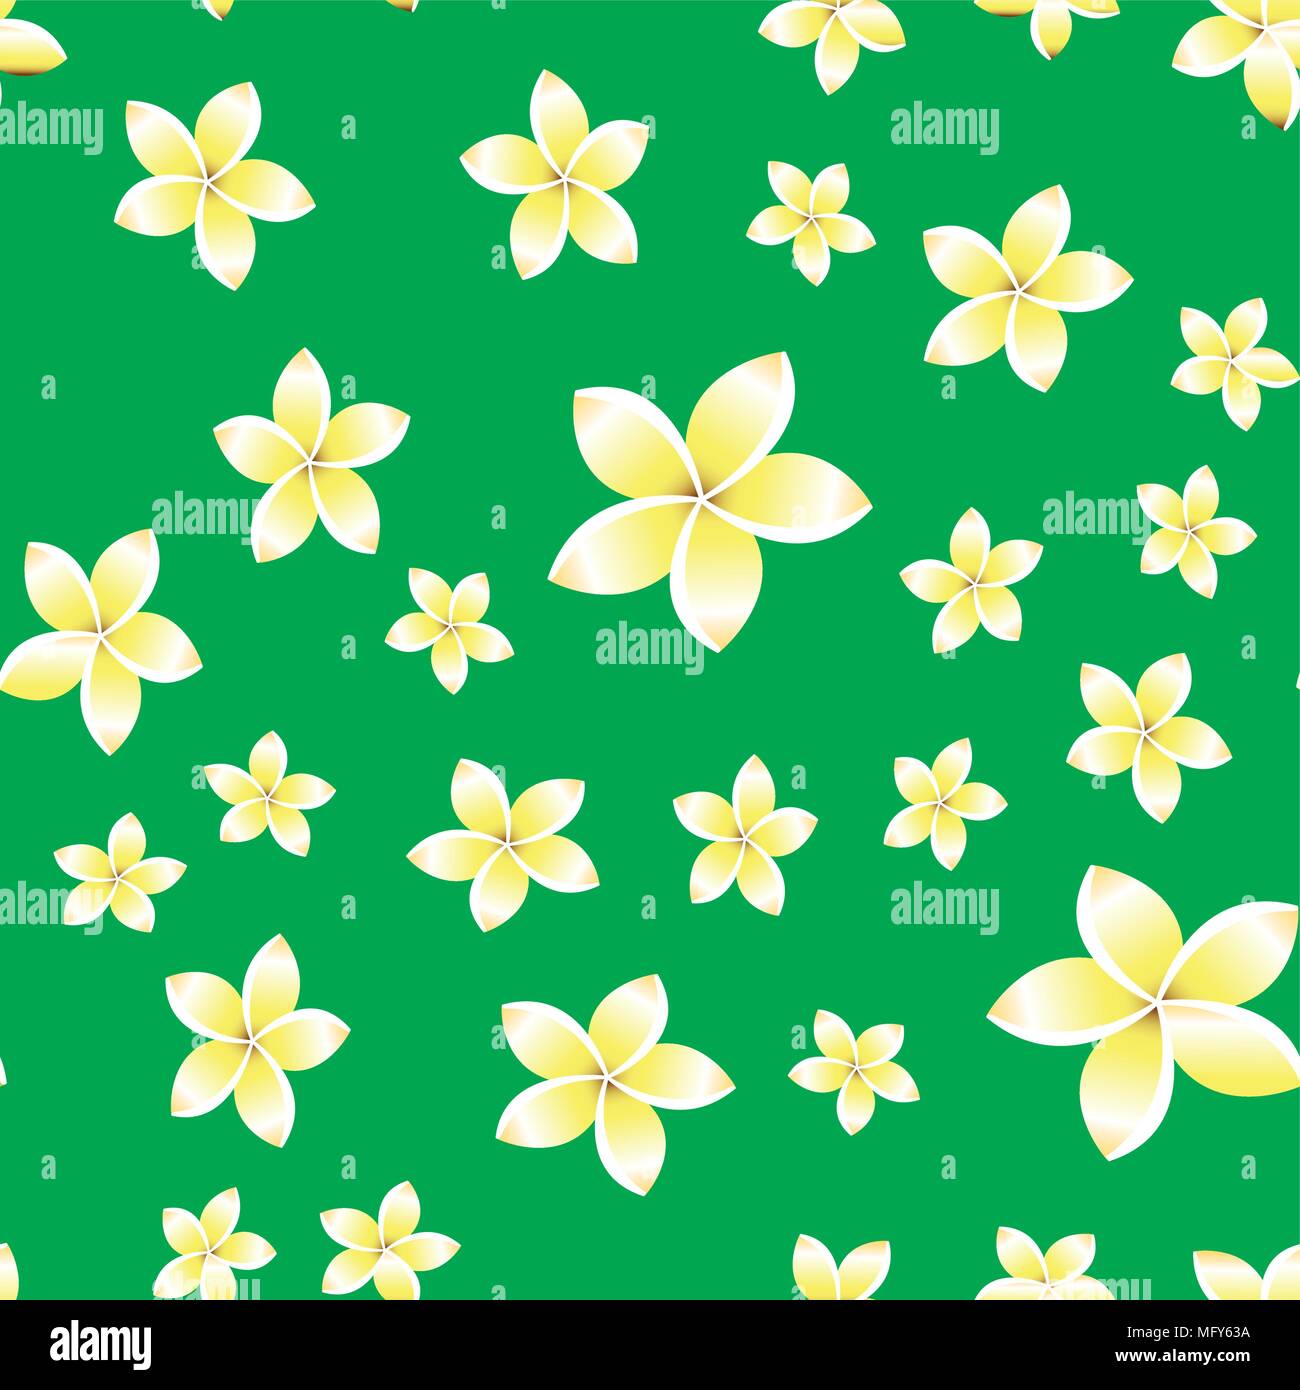 Seamless pattern with White frangipani flowers, vector illustration, Stock Vector